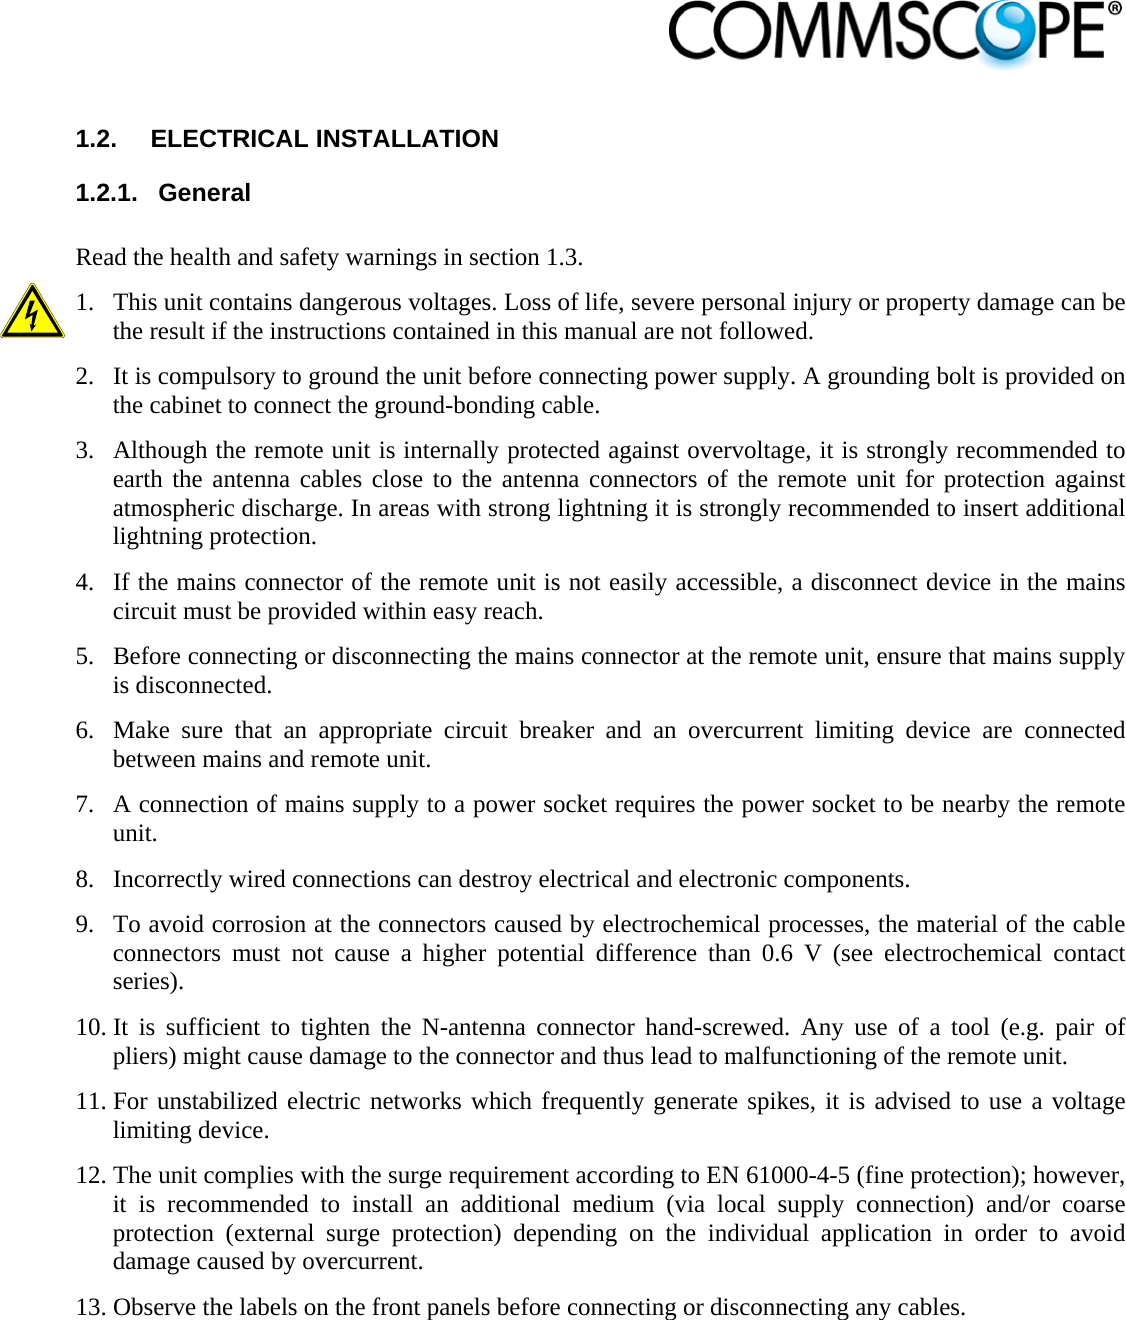                             1.2.  ELECTRICAL INSTALLATION 1.2.1.  General  Read the health and safety warnings in section 1.3.  1. This unit contains dangerous voltages. Loss of life, severe personal injury or property damage can be the result if the instructions contained in this manual are not followed. 2. It is compulsory to ground the unit before connecting power supply. A grounding bolt is provided on the cabinet to connect the ground-bonding cable. 3. Although the remote unit is internally protected against overvoltage, it is strongly recommended to earth the antenna cables close to the antenna connectors of the remote unit for protection against atmospheric discharge. In areas with strong lightning it is strongly recommended to insert additional lightning protection. 4. If the mains connector of the remote unit is not easily accessible, a disconnect device in the mains circuit must be provided within easy reach. 5. Before connecting or disconnecting the mains connector at the remote unit, ensure that mains supply is disconnected. 6. Make sure that an appropriate circuit breaker and an overcurrent limiting device are connected between mains and remote unit. 7. A connection of mains supply to a power socket requires the power socket to be nearby the remote unit. 8. Incorrectly wired connections can destroy electrical and electronic components. 9. To avoid corrosion at the connectors caused by electrochemical processes, the material of the cable connectors must not cause a higher potential difference than 0.6 V (see electrochemical contact series). 10. It is sufficient to tighten the N-antenna connector hand-screwed. Any use of a tool (e.g. pair of pliers) might cause damage to the connector and thus lead to malfunctioning of the remote unit. 11. For unstabilized electric networks which frequently generate spikes, it is advised to use a voltage limiting device.  12. The unit complies with the surge requirement according to EN 61000-4-5 (fine protection); however, it is recommended to install an additional medium (via local supply connection) and/or coarse protection (external surge protection) depending on the individual application in order to avoid damage caused by overcurrent. 13. Observe the labels on the front panels before connecting or disconnecting any cables. 